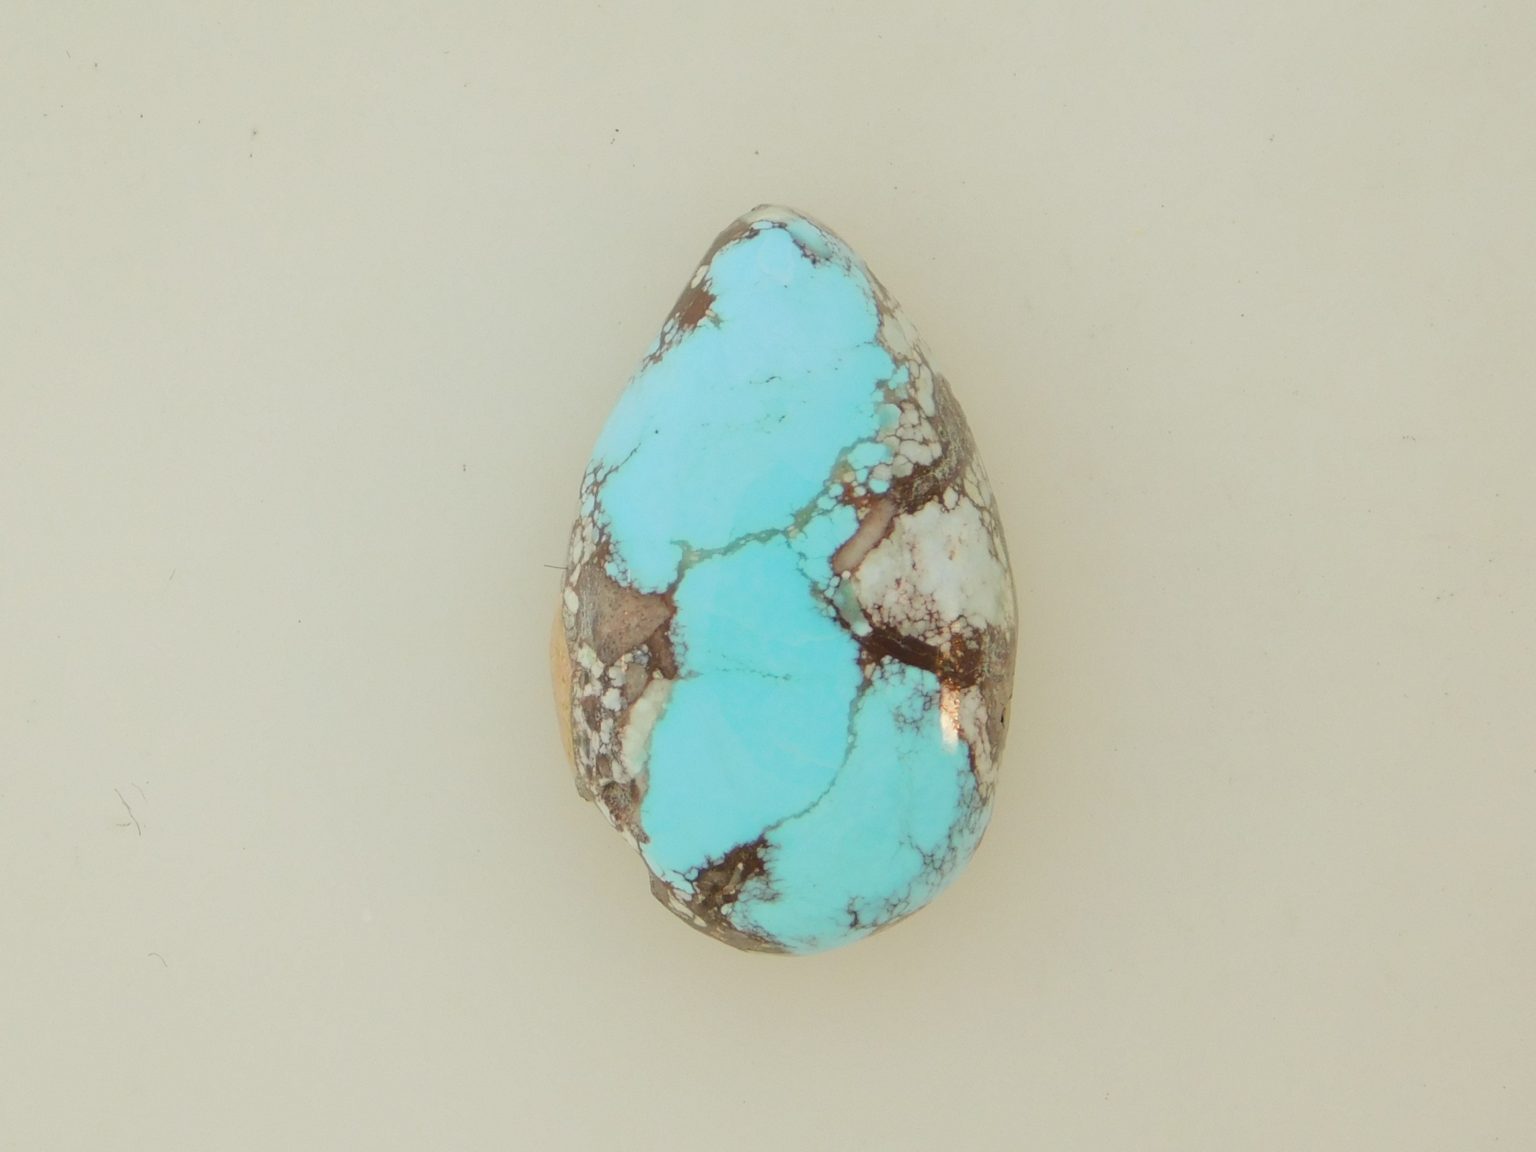 MEDIUM BLUE BISBEE TURQUOISE with light host 15.5 carats